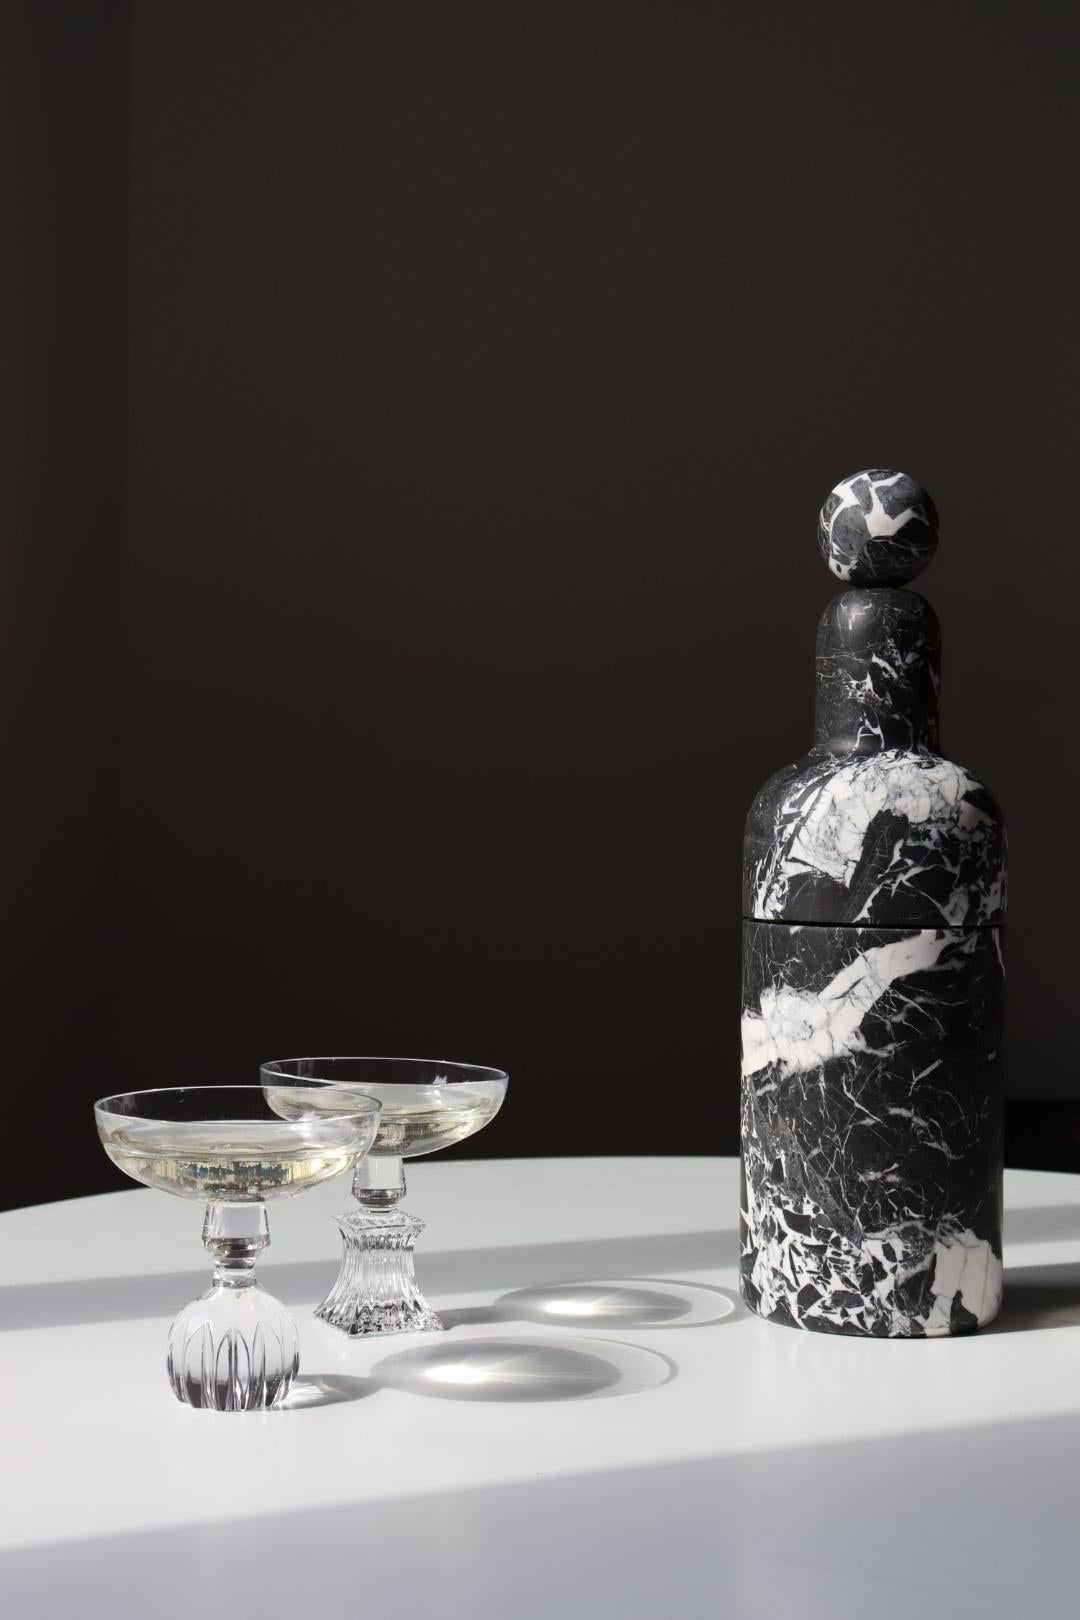 A bottle cooler that preserves the temperature of the bottle in the most natural way, avoiding the use of ice.
Made in grand antique marble, with a brass glass inside.
It is conceived to host all standard sizes of both wine and champagne